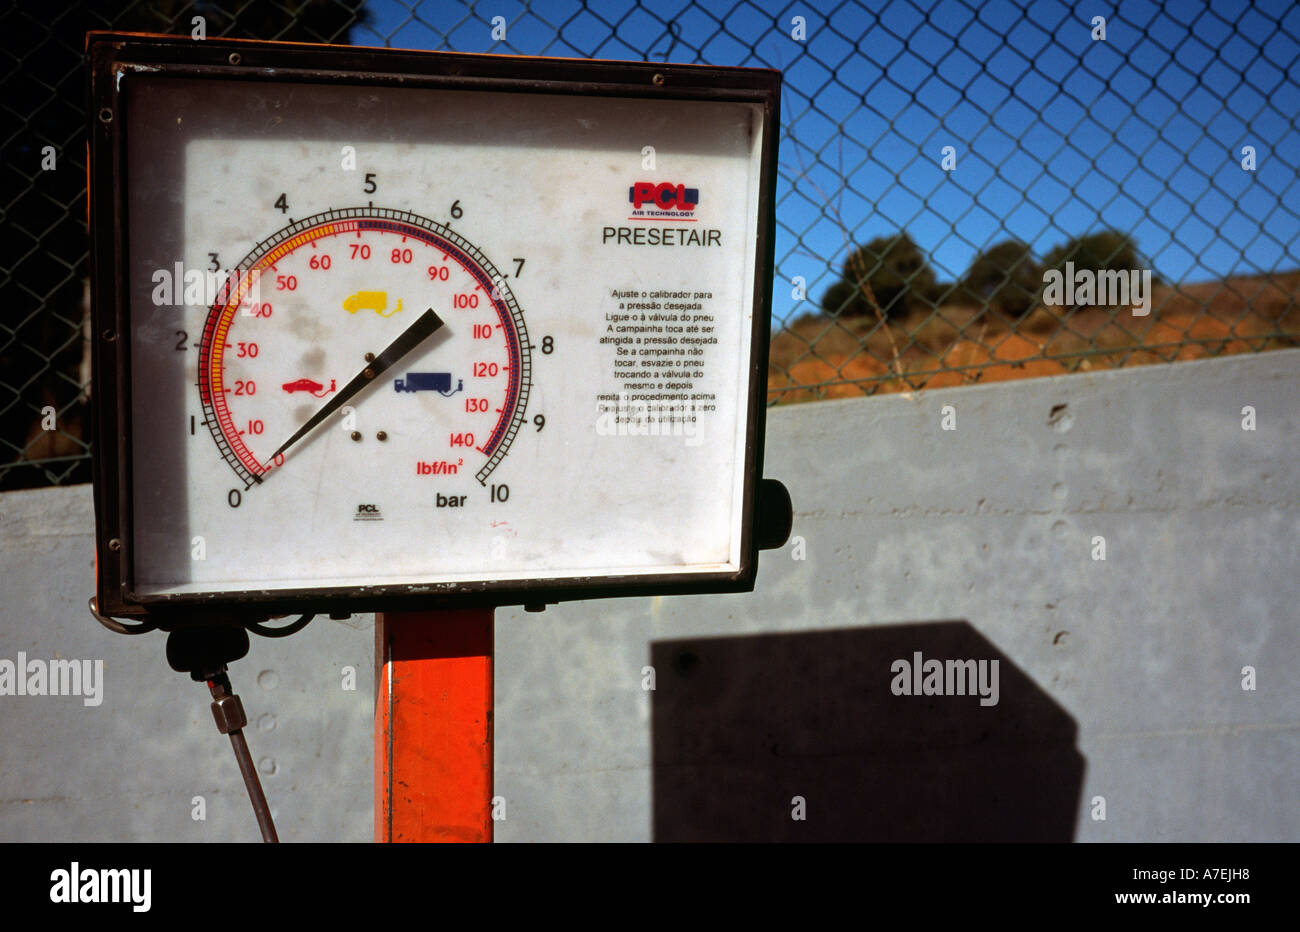 Oct 23, 2003 - Air pressure device at GALP petrol station in the Portugese town of Aljezur. Stock Photo